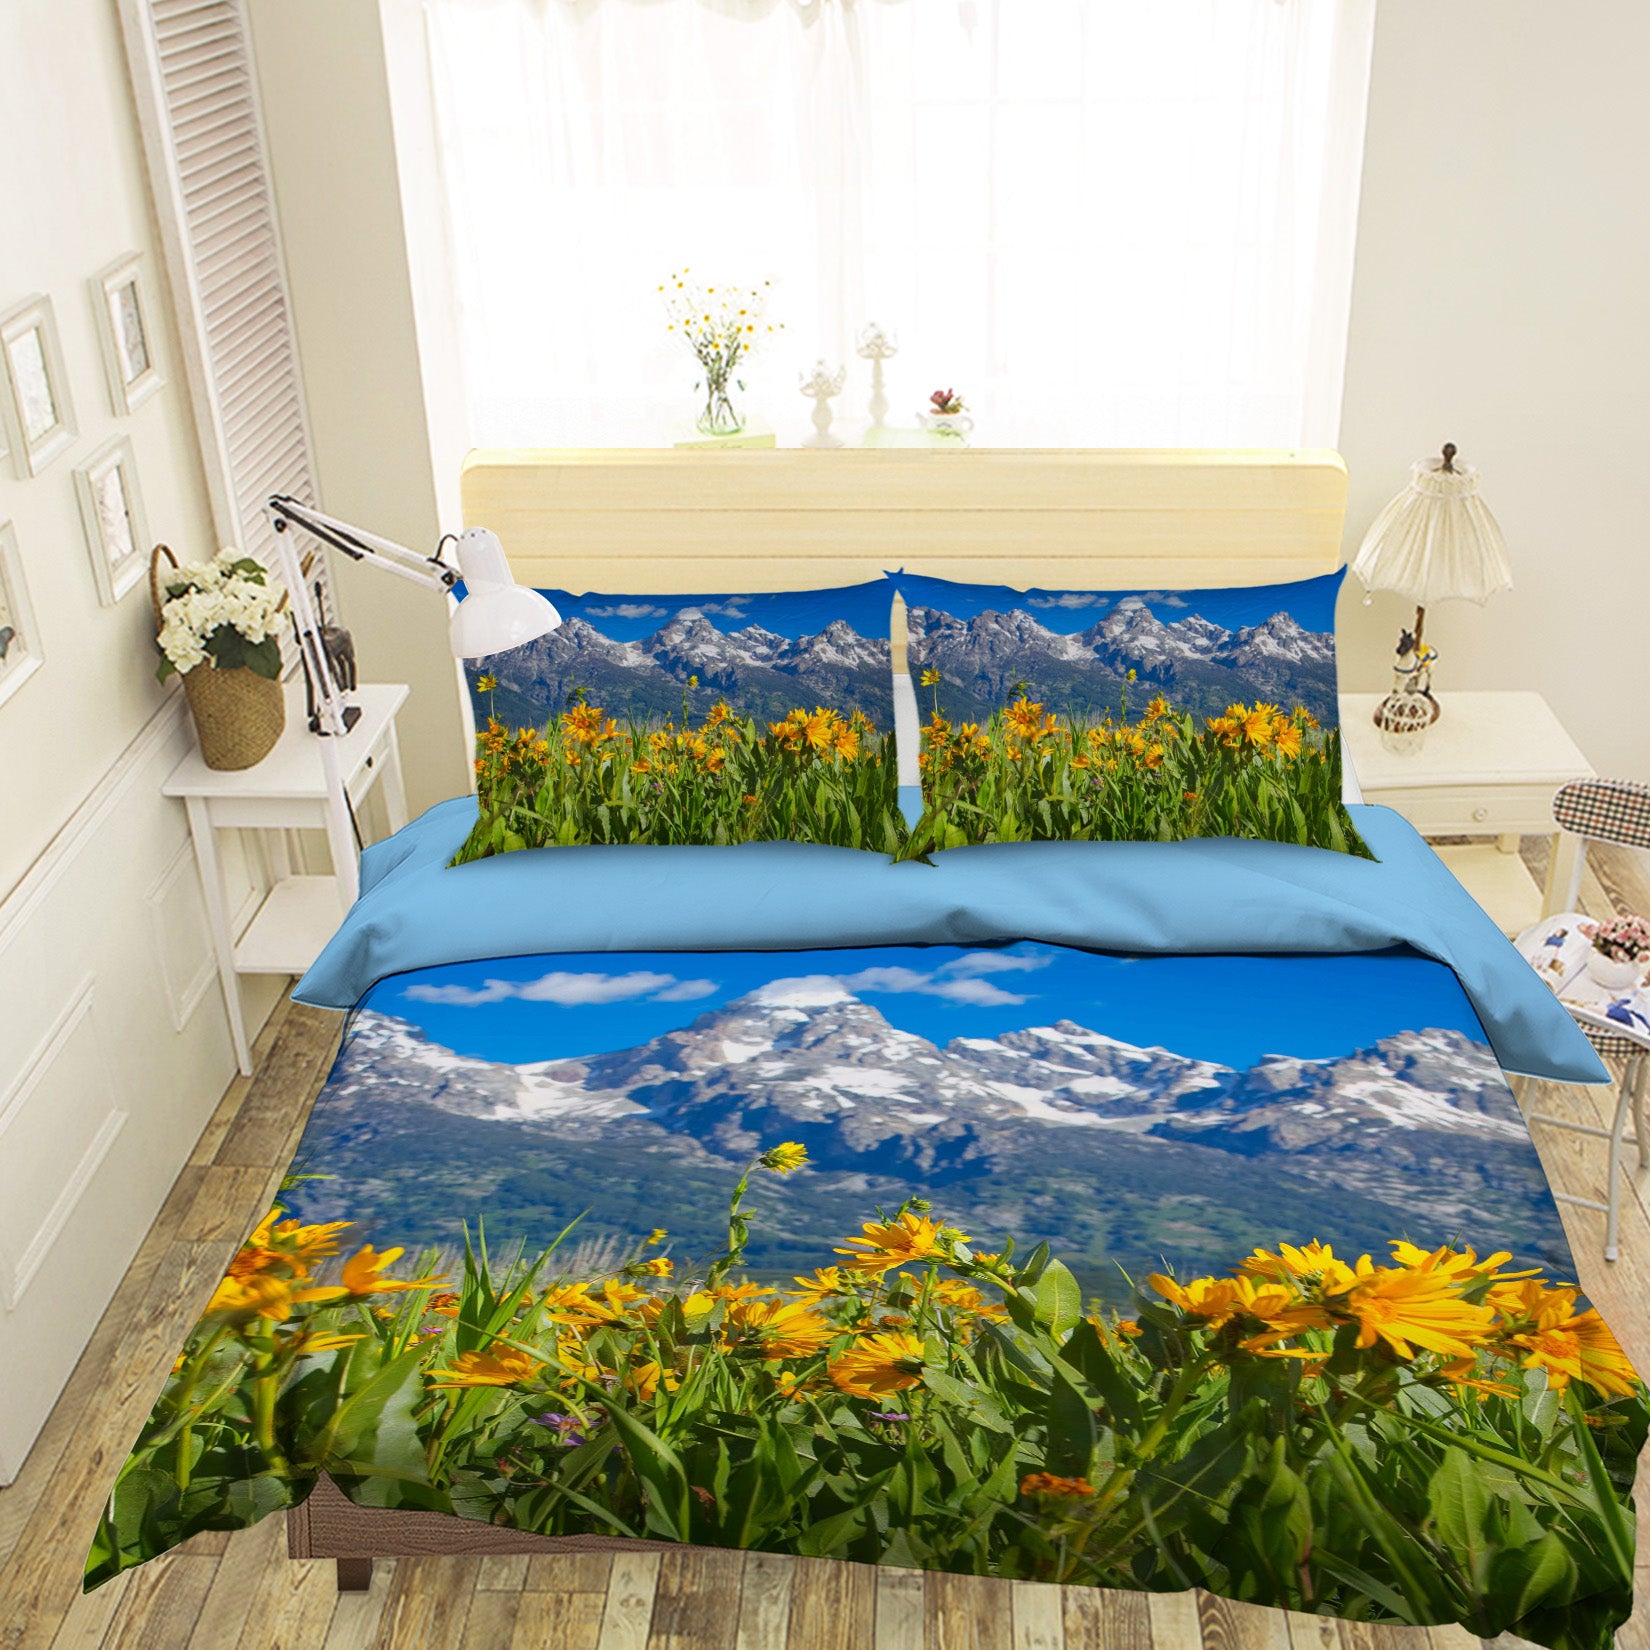 3D Mountain Wildflowers 2122 Kathy Barefield Bedding Bed Pillowcases Quilt